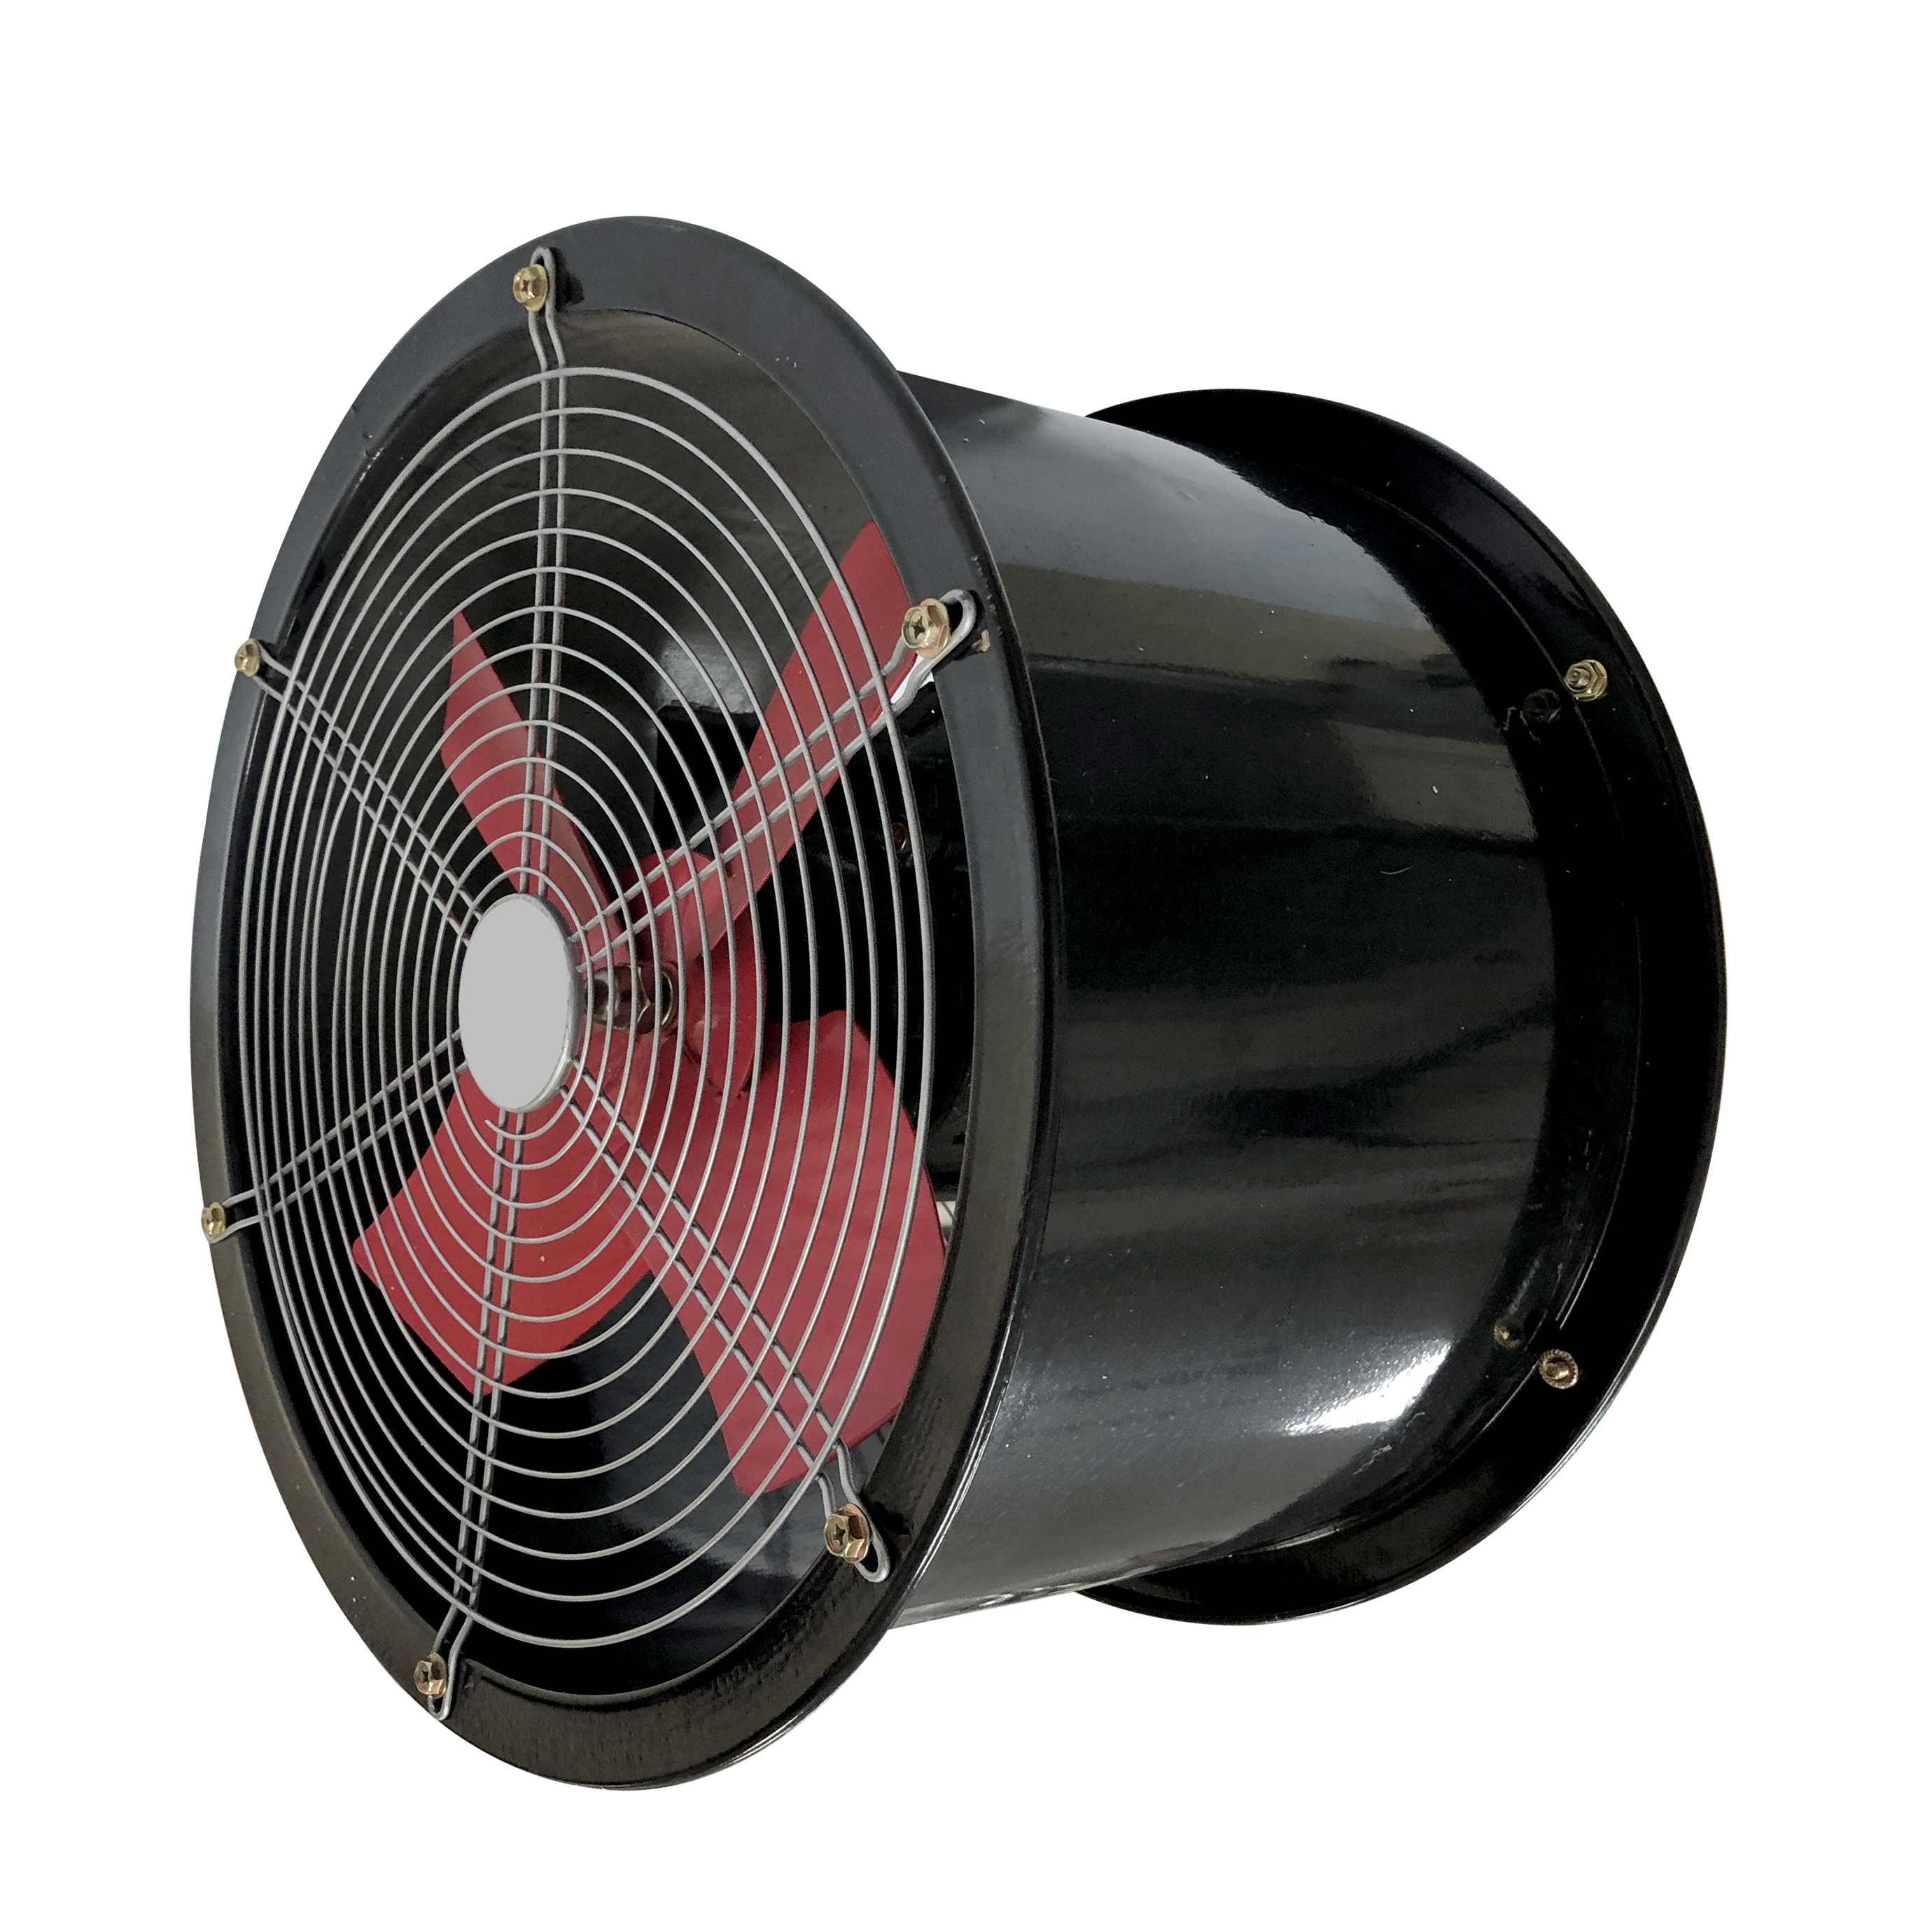 8 To 24 Inch Warehouse Use Air Circulation Heavy Duty Axial Blower Fan